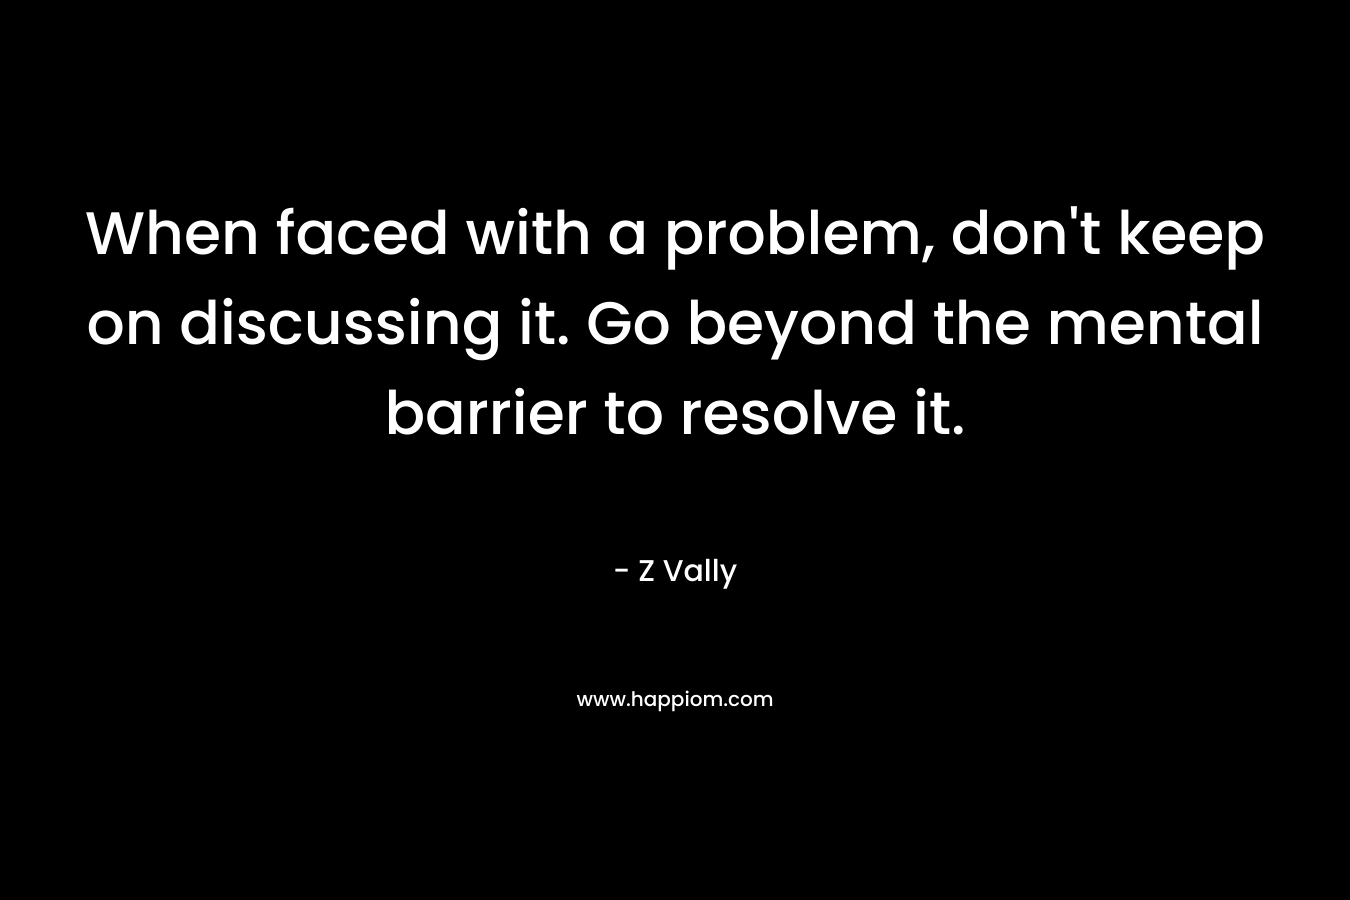 When faced with a problem, don’t keep on discussing it. Go beyond the mental barrier to resolve it. – Z Vally